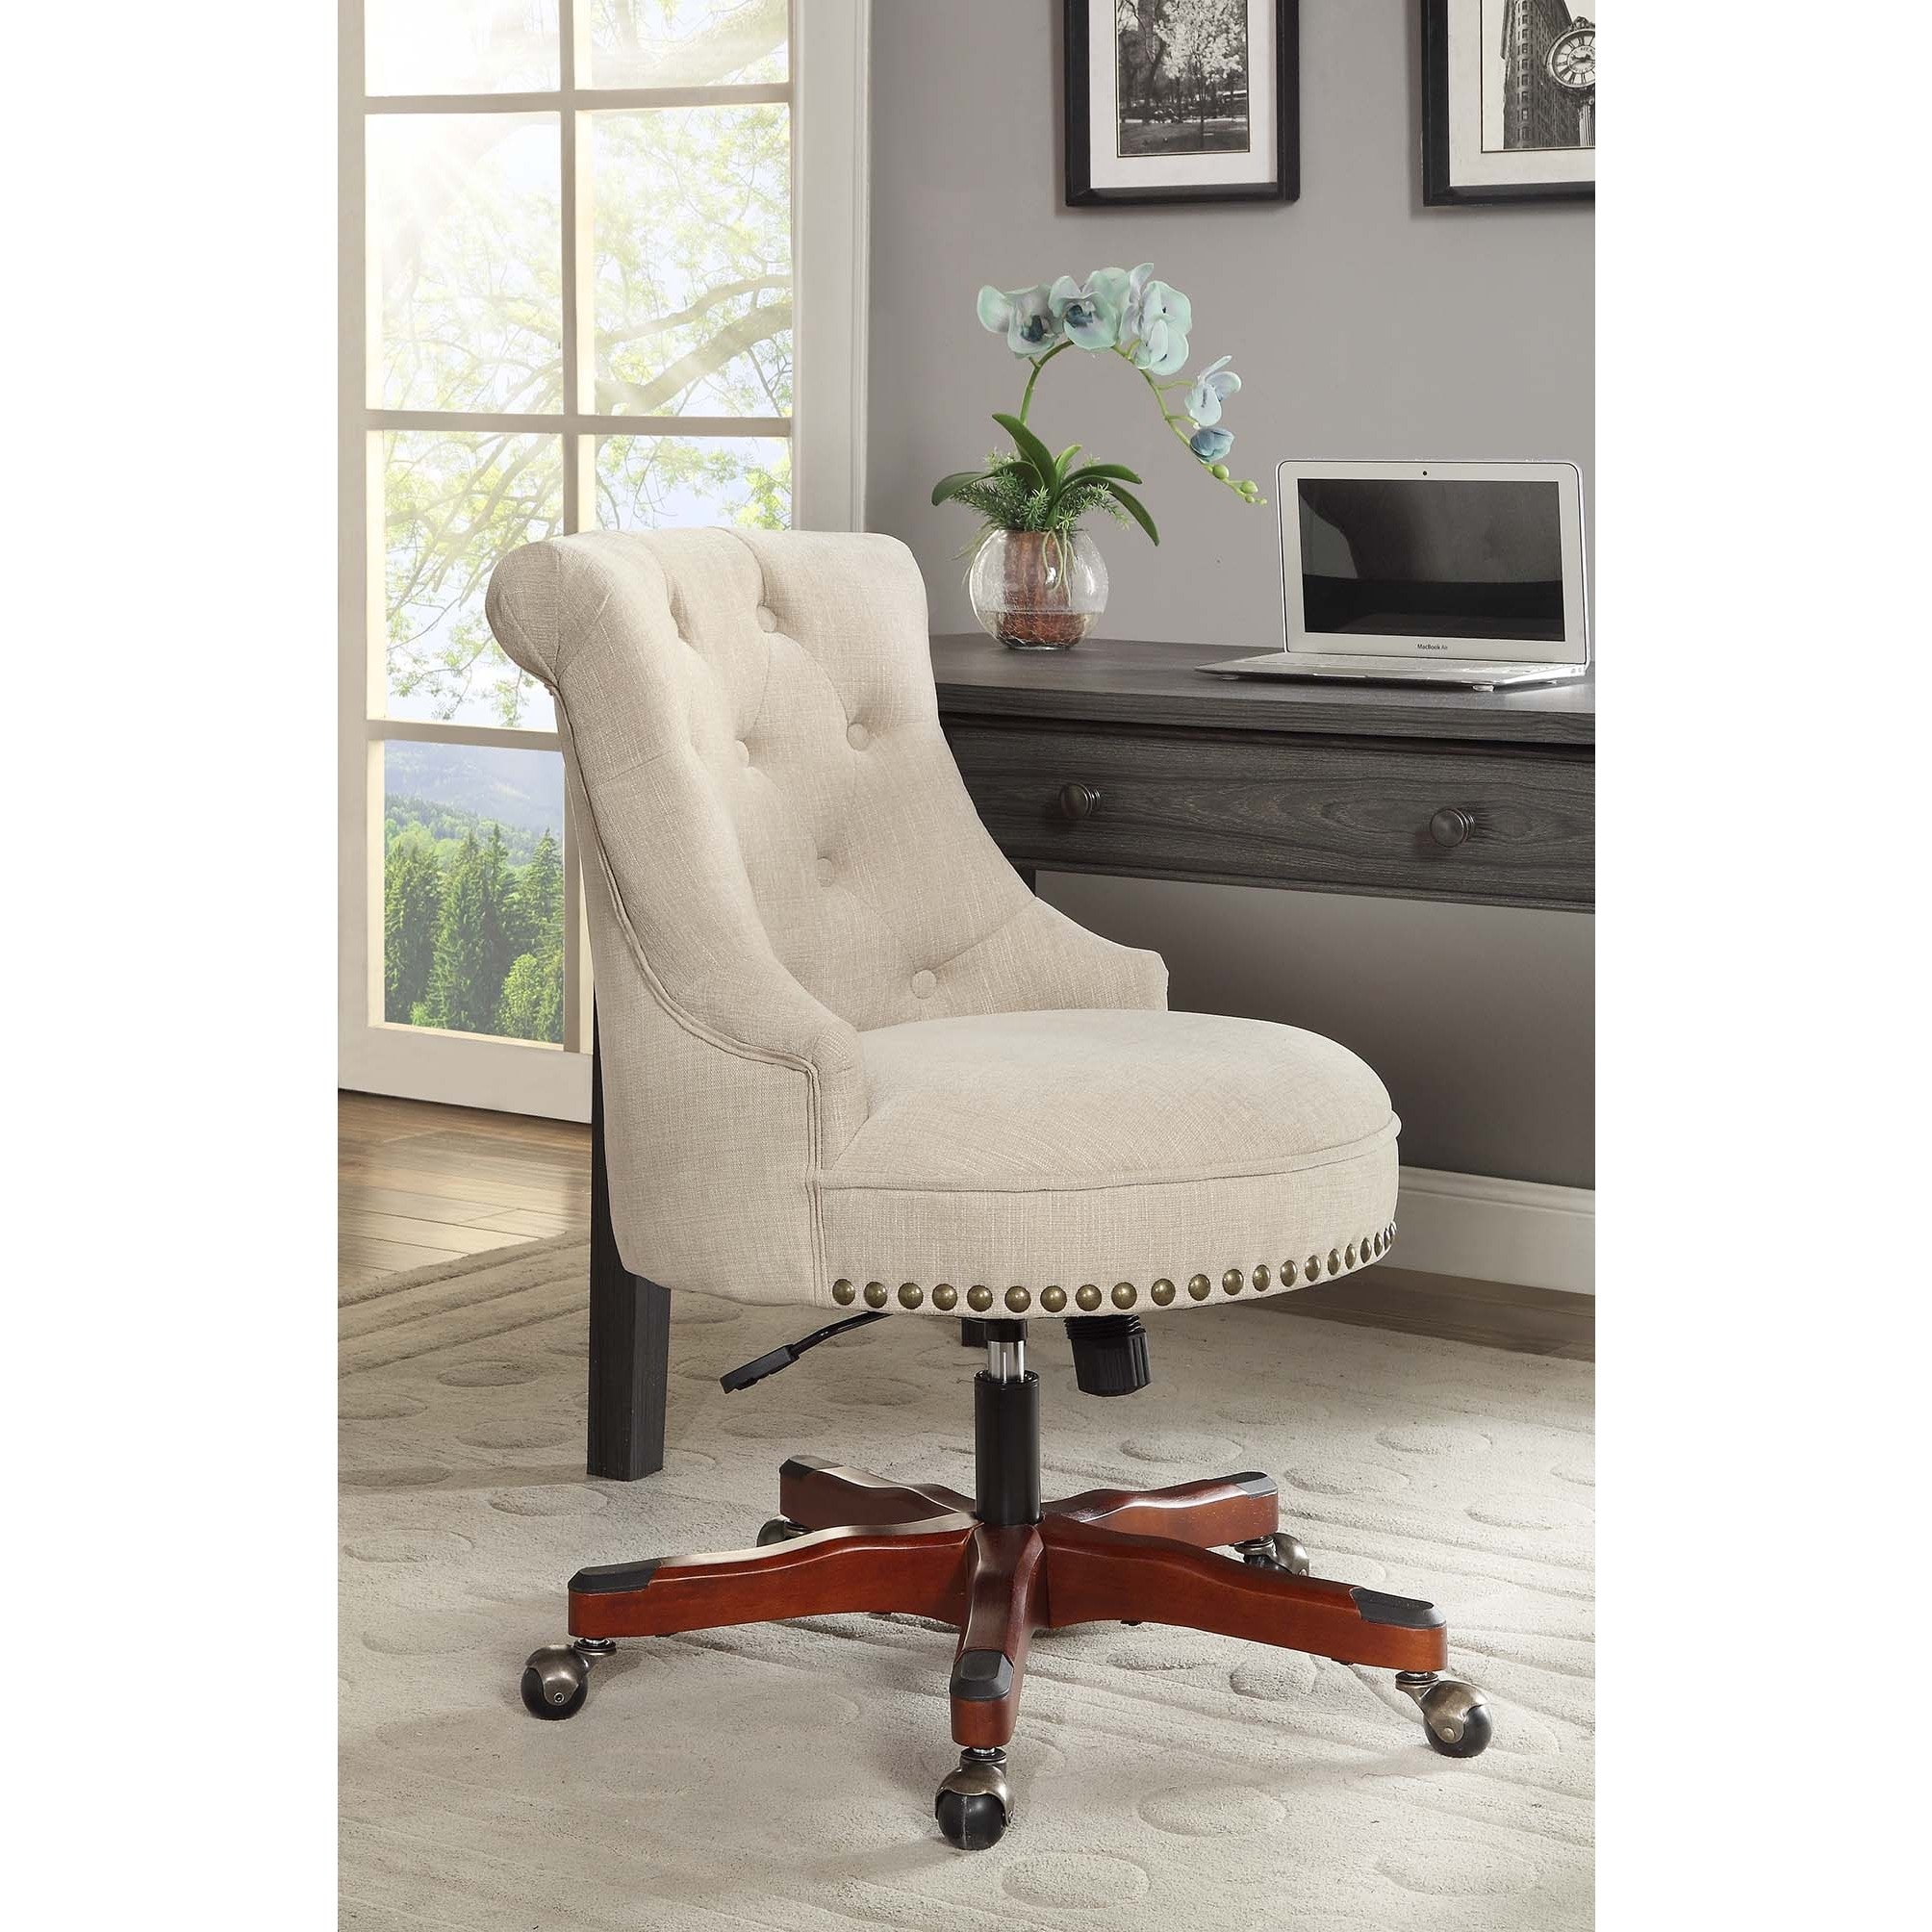 Featured image of post Linon Home Decor Office Chair - Linon fiona faux fur upholstered office chair in white.